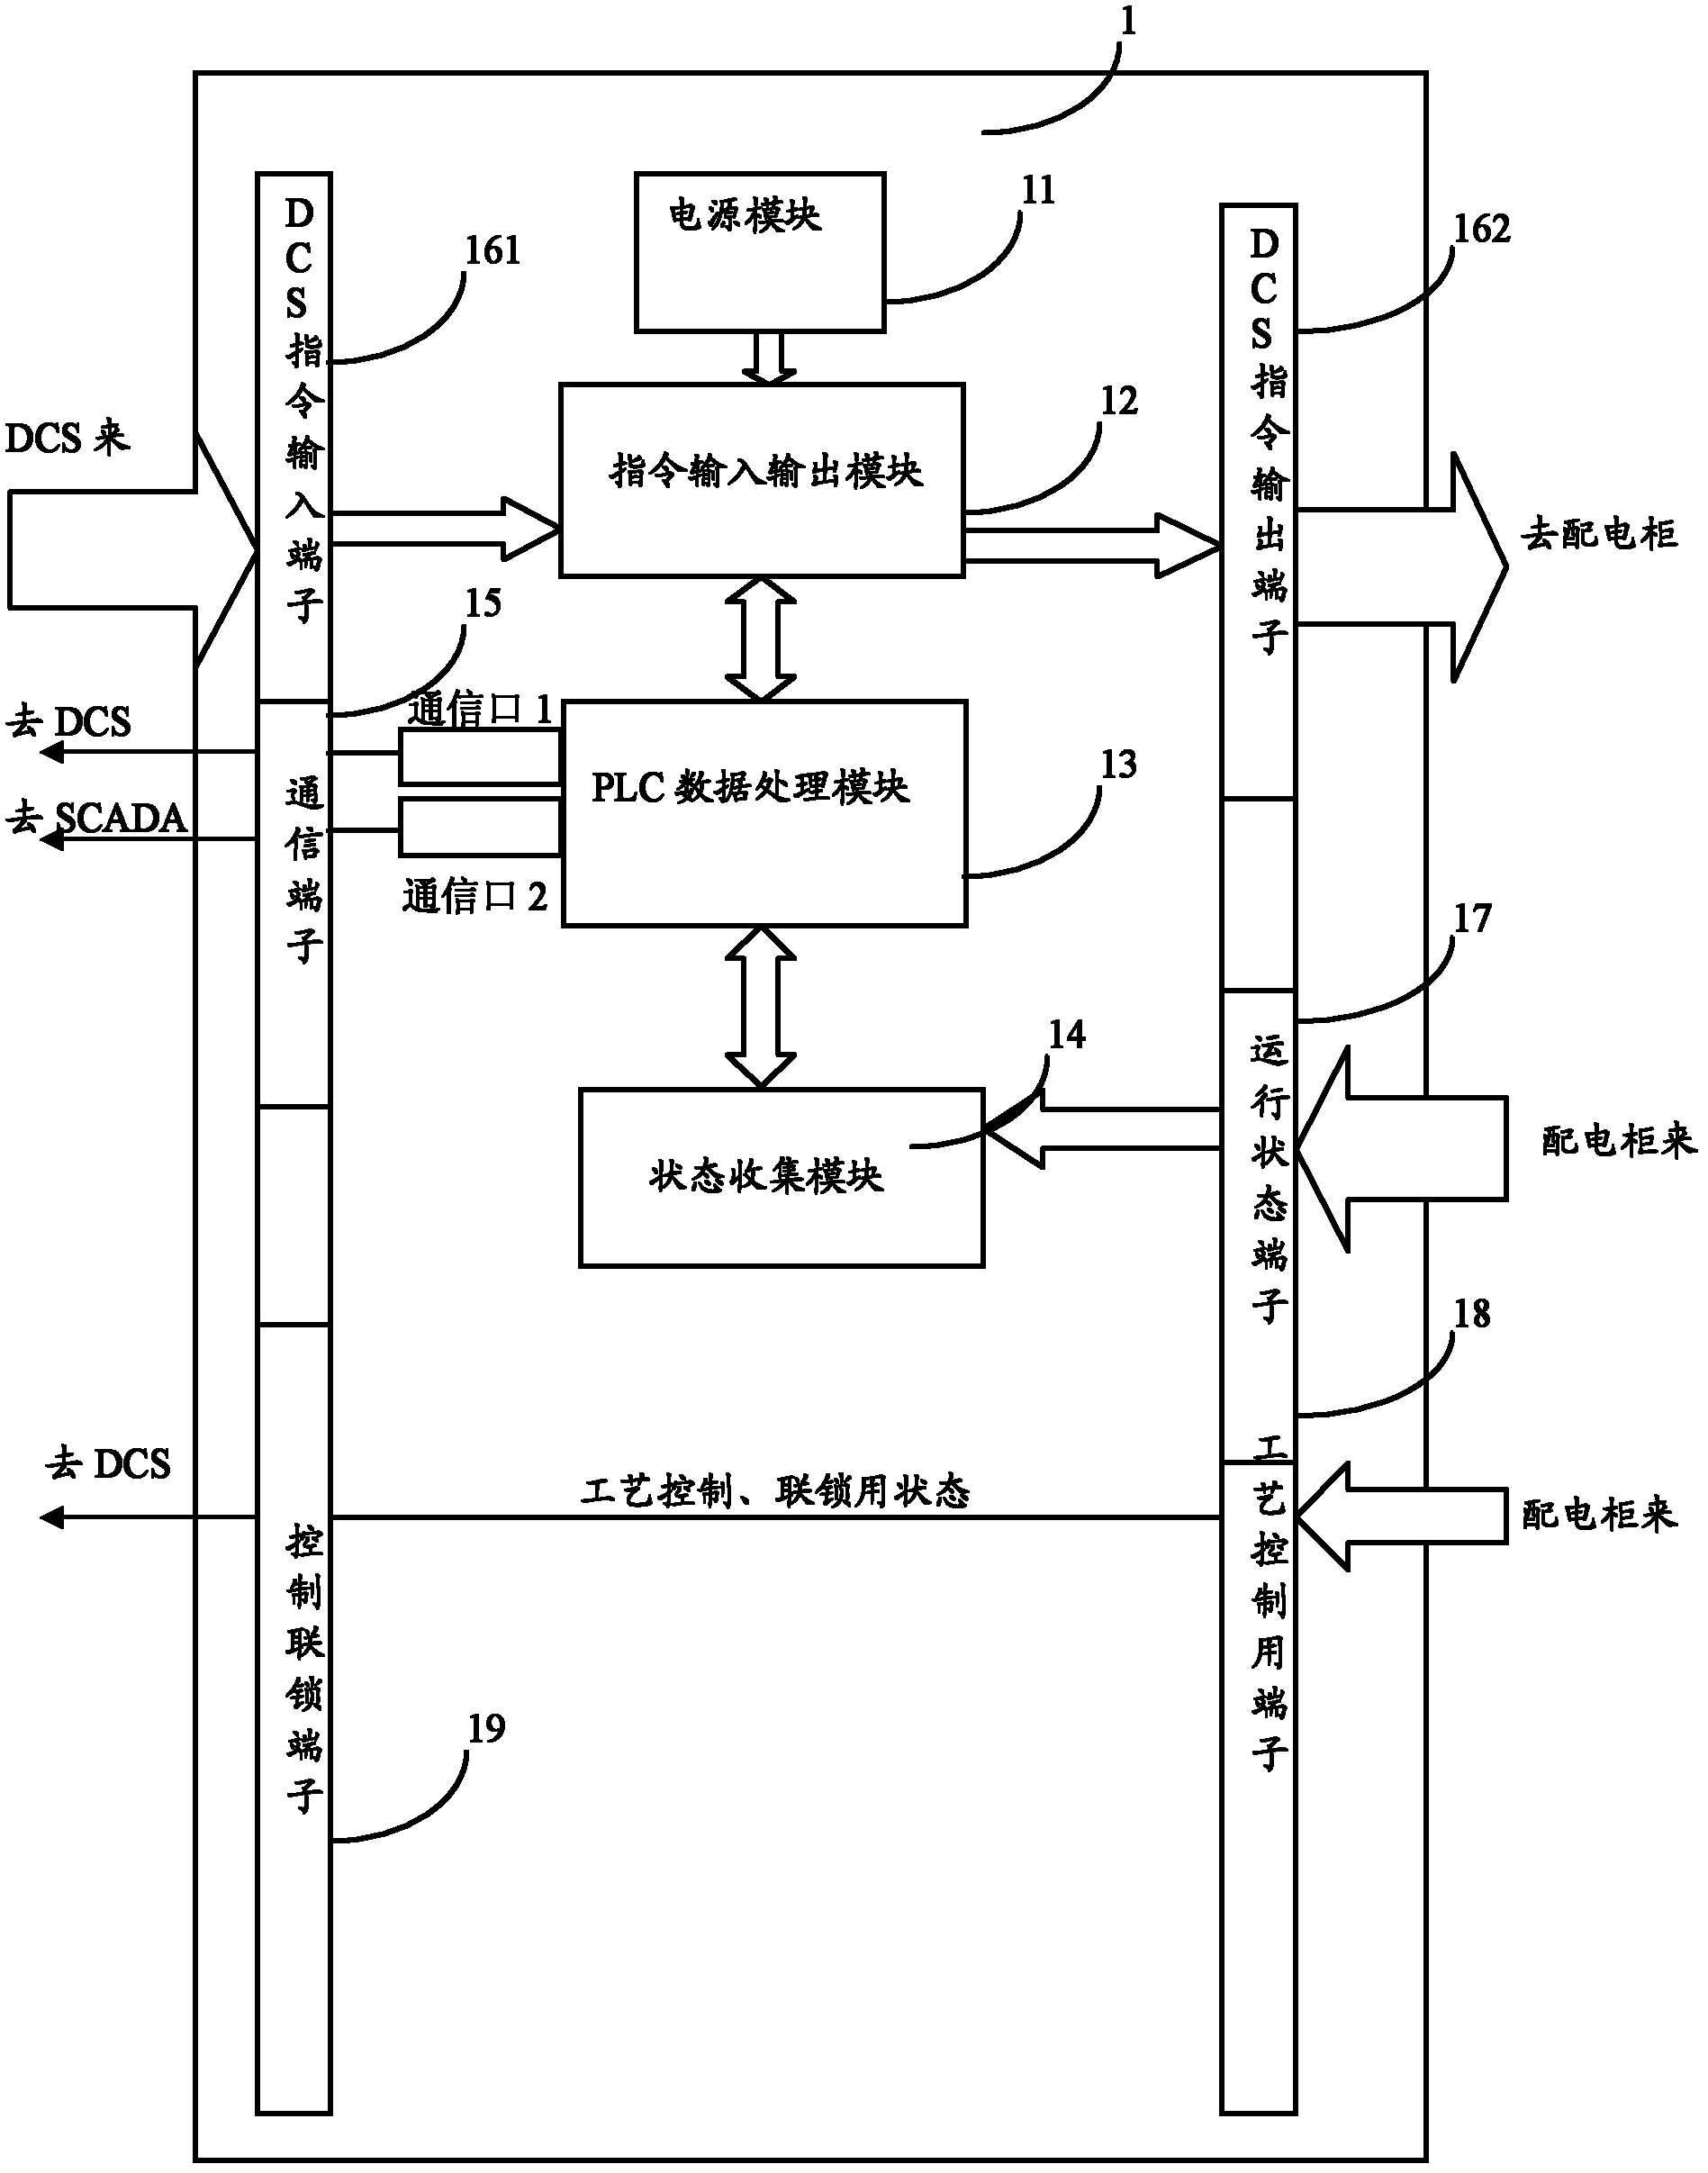 Network terminal cabinet system for distributed control system (DCS) instruction